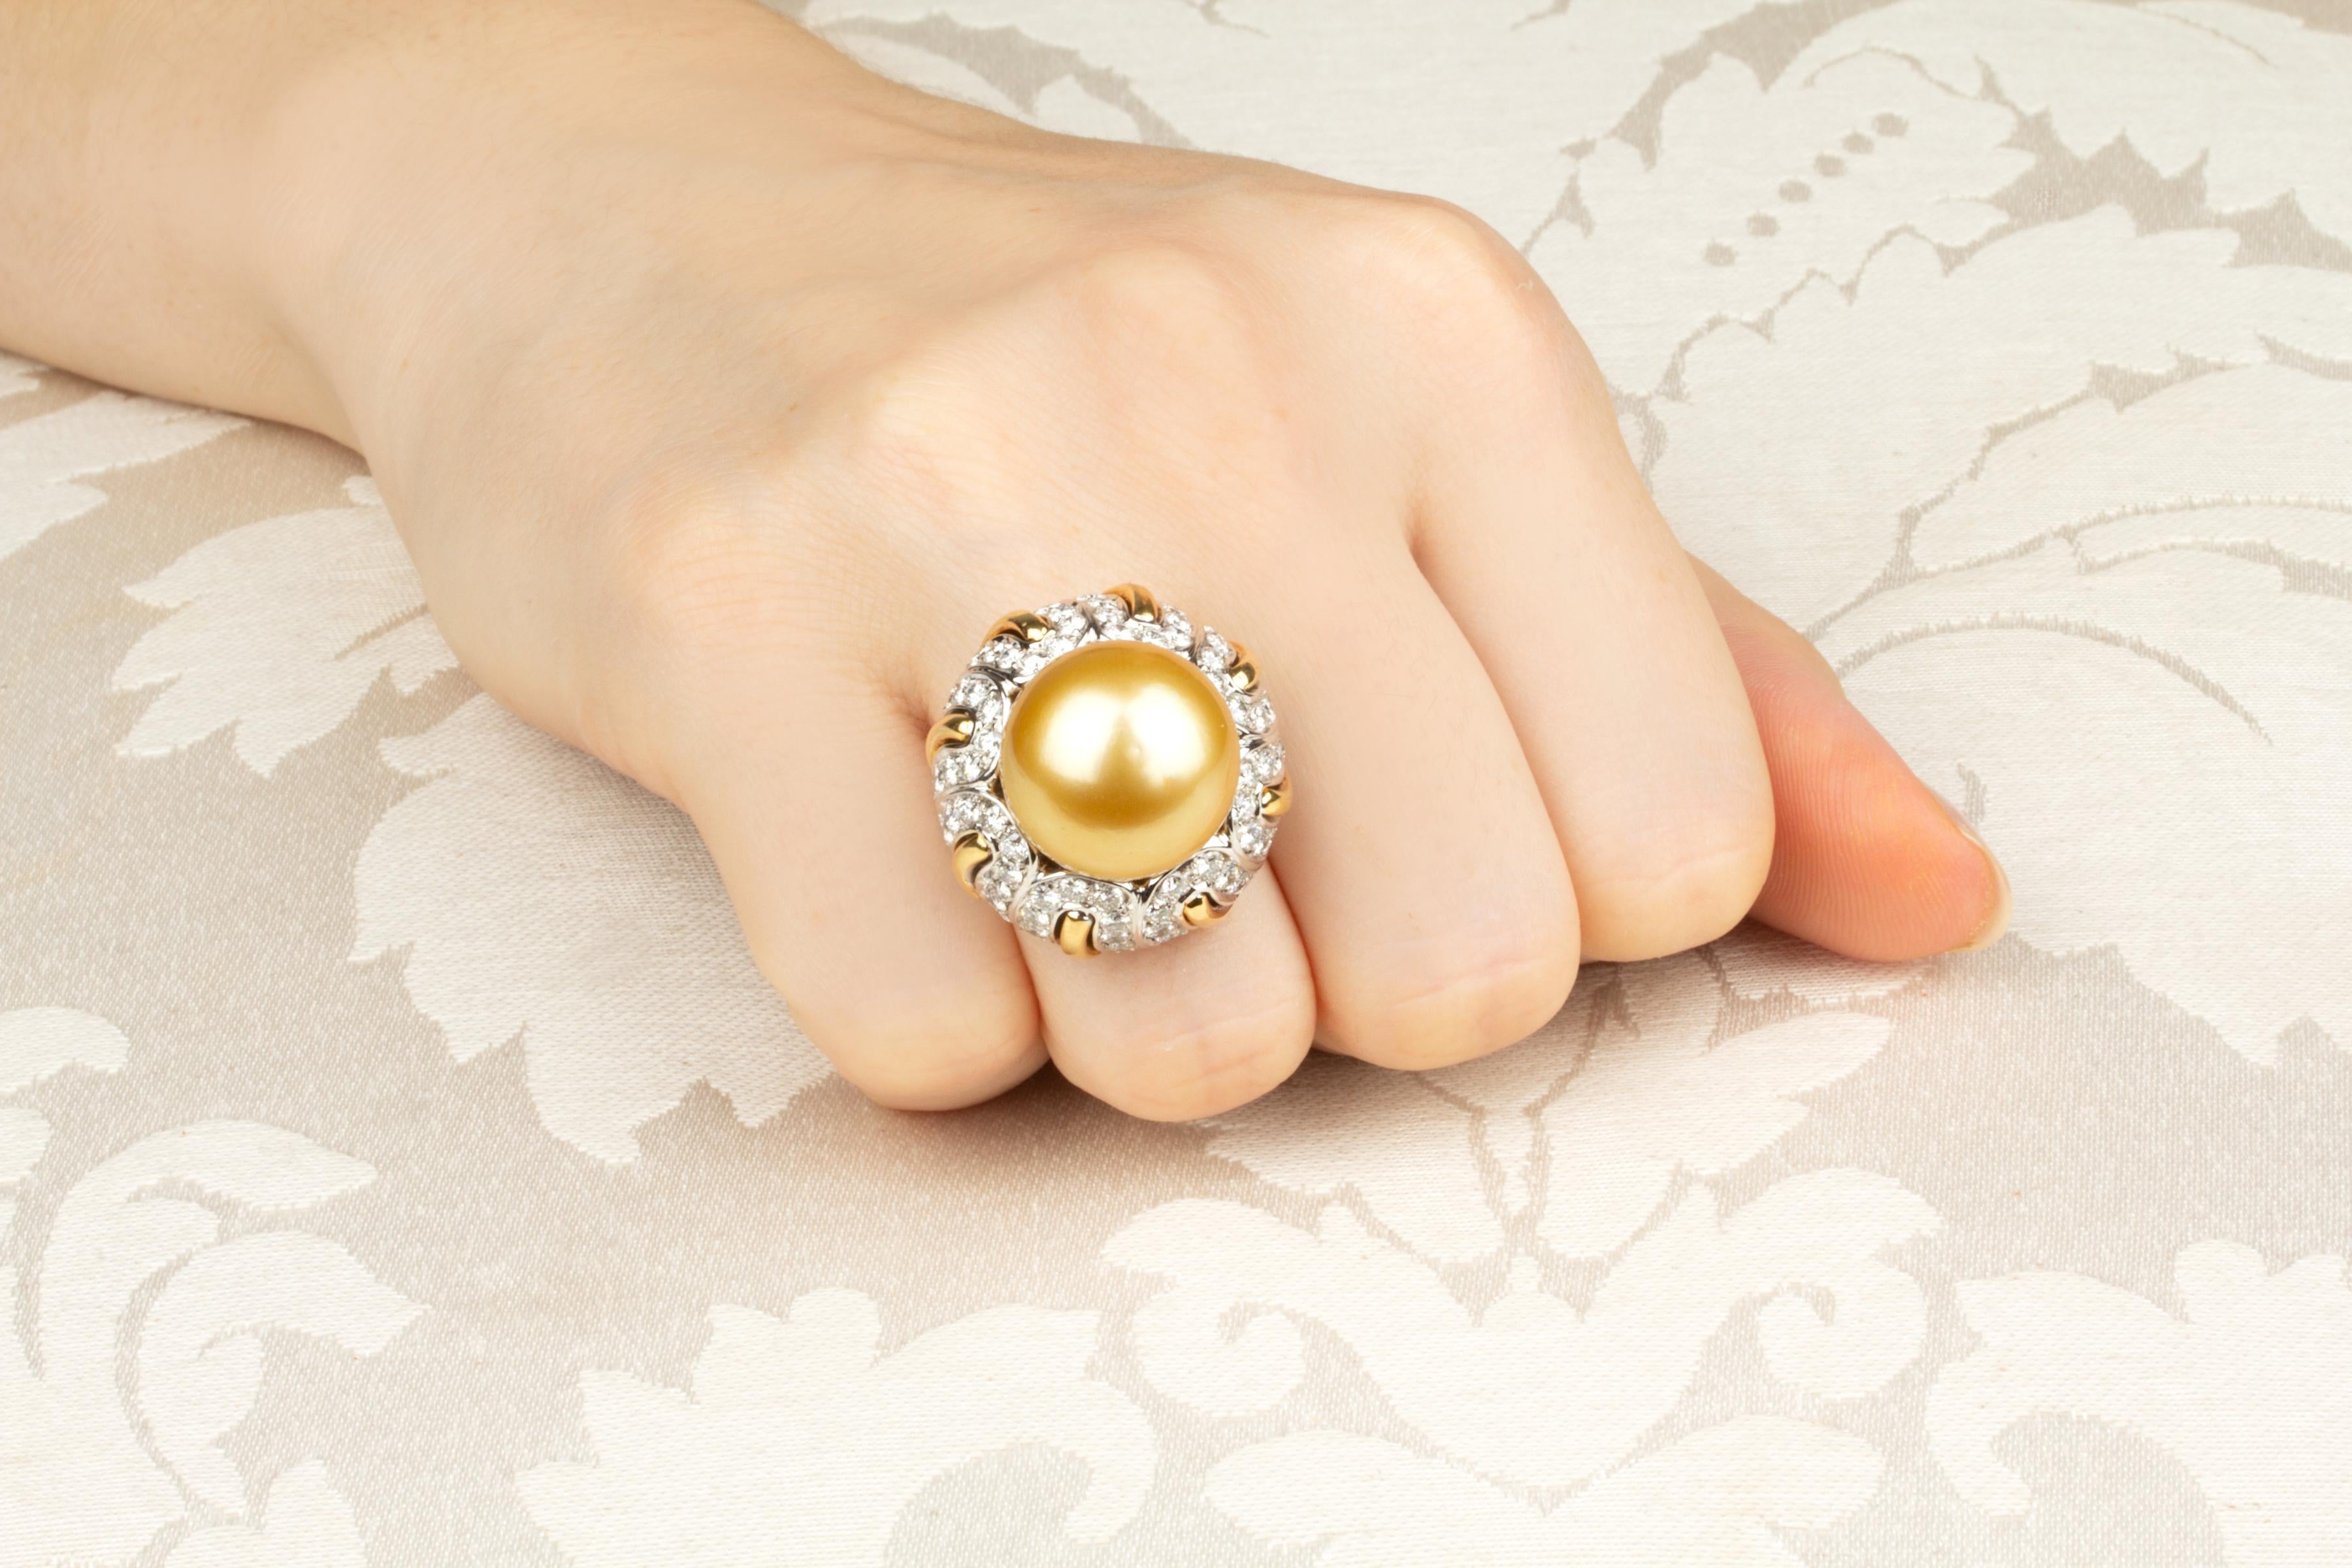 Round Cut Ella Gafter Golden Pearl 16mm Diamond Ring For Sale